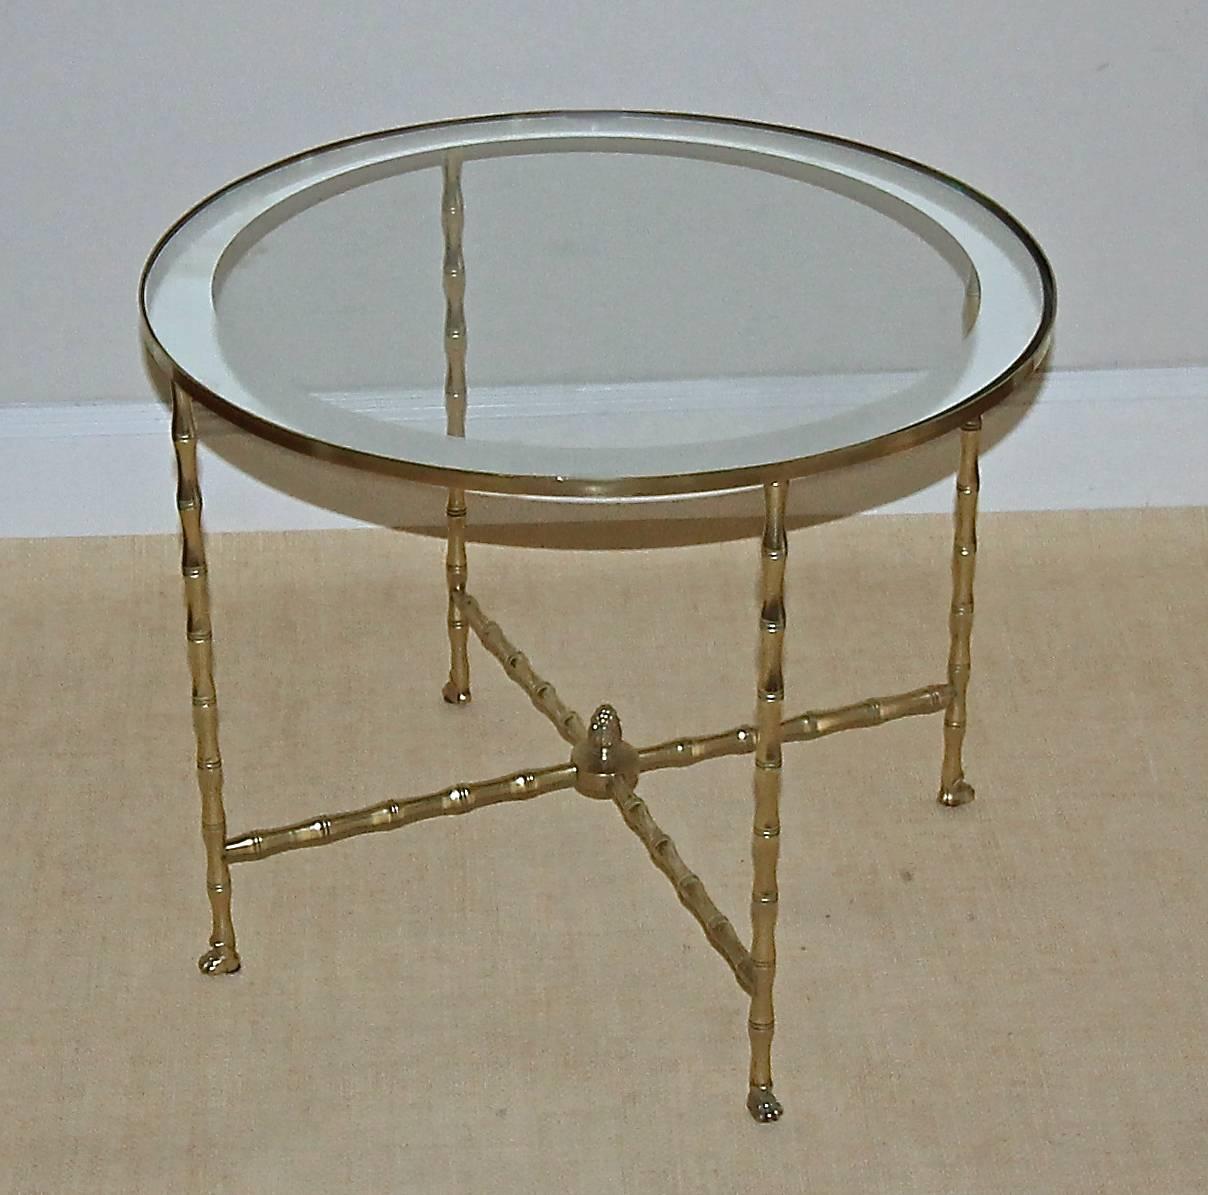 French, 1940s bronze or brass faux bamboo round side table (or coffee table for smaller scale room) with glass mirrored edge inset top by Maison Bagues. Exceptional detailing including paw feet and center finial.